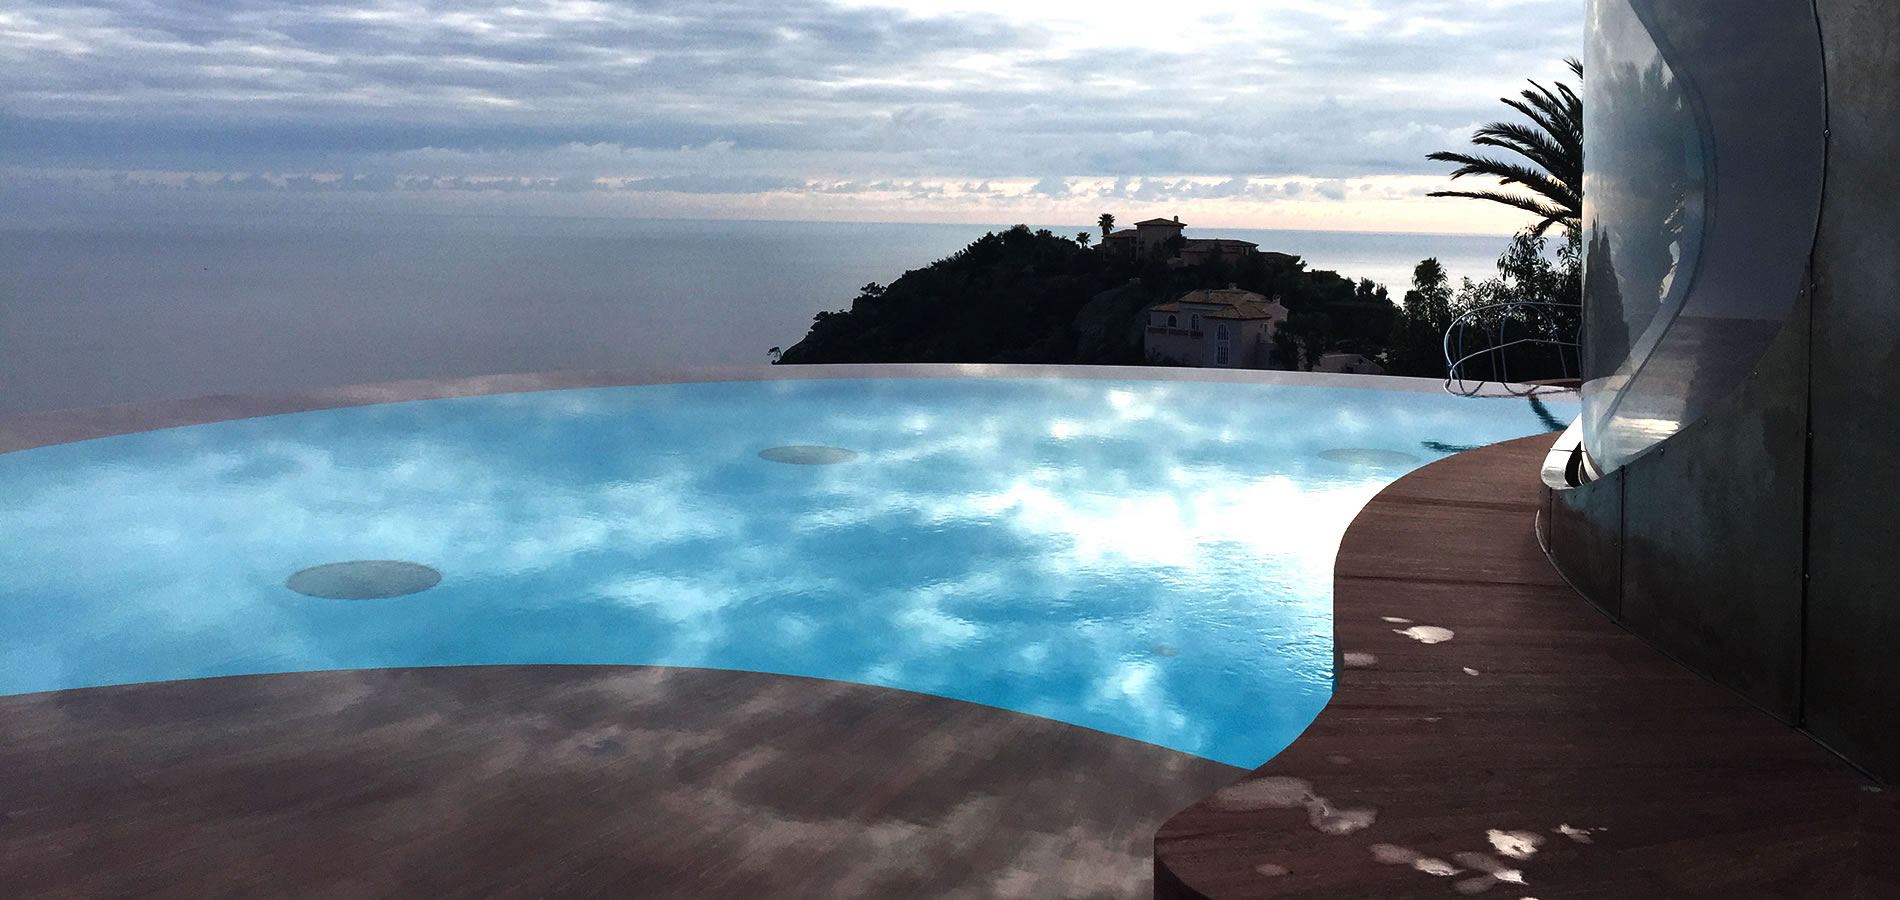 The Palais Bulles in balance between the sea and the sky.